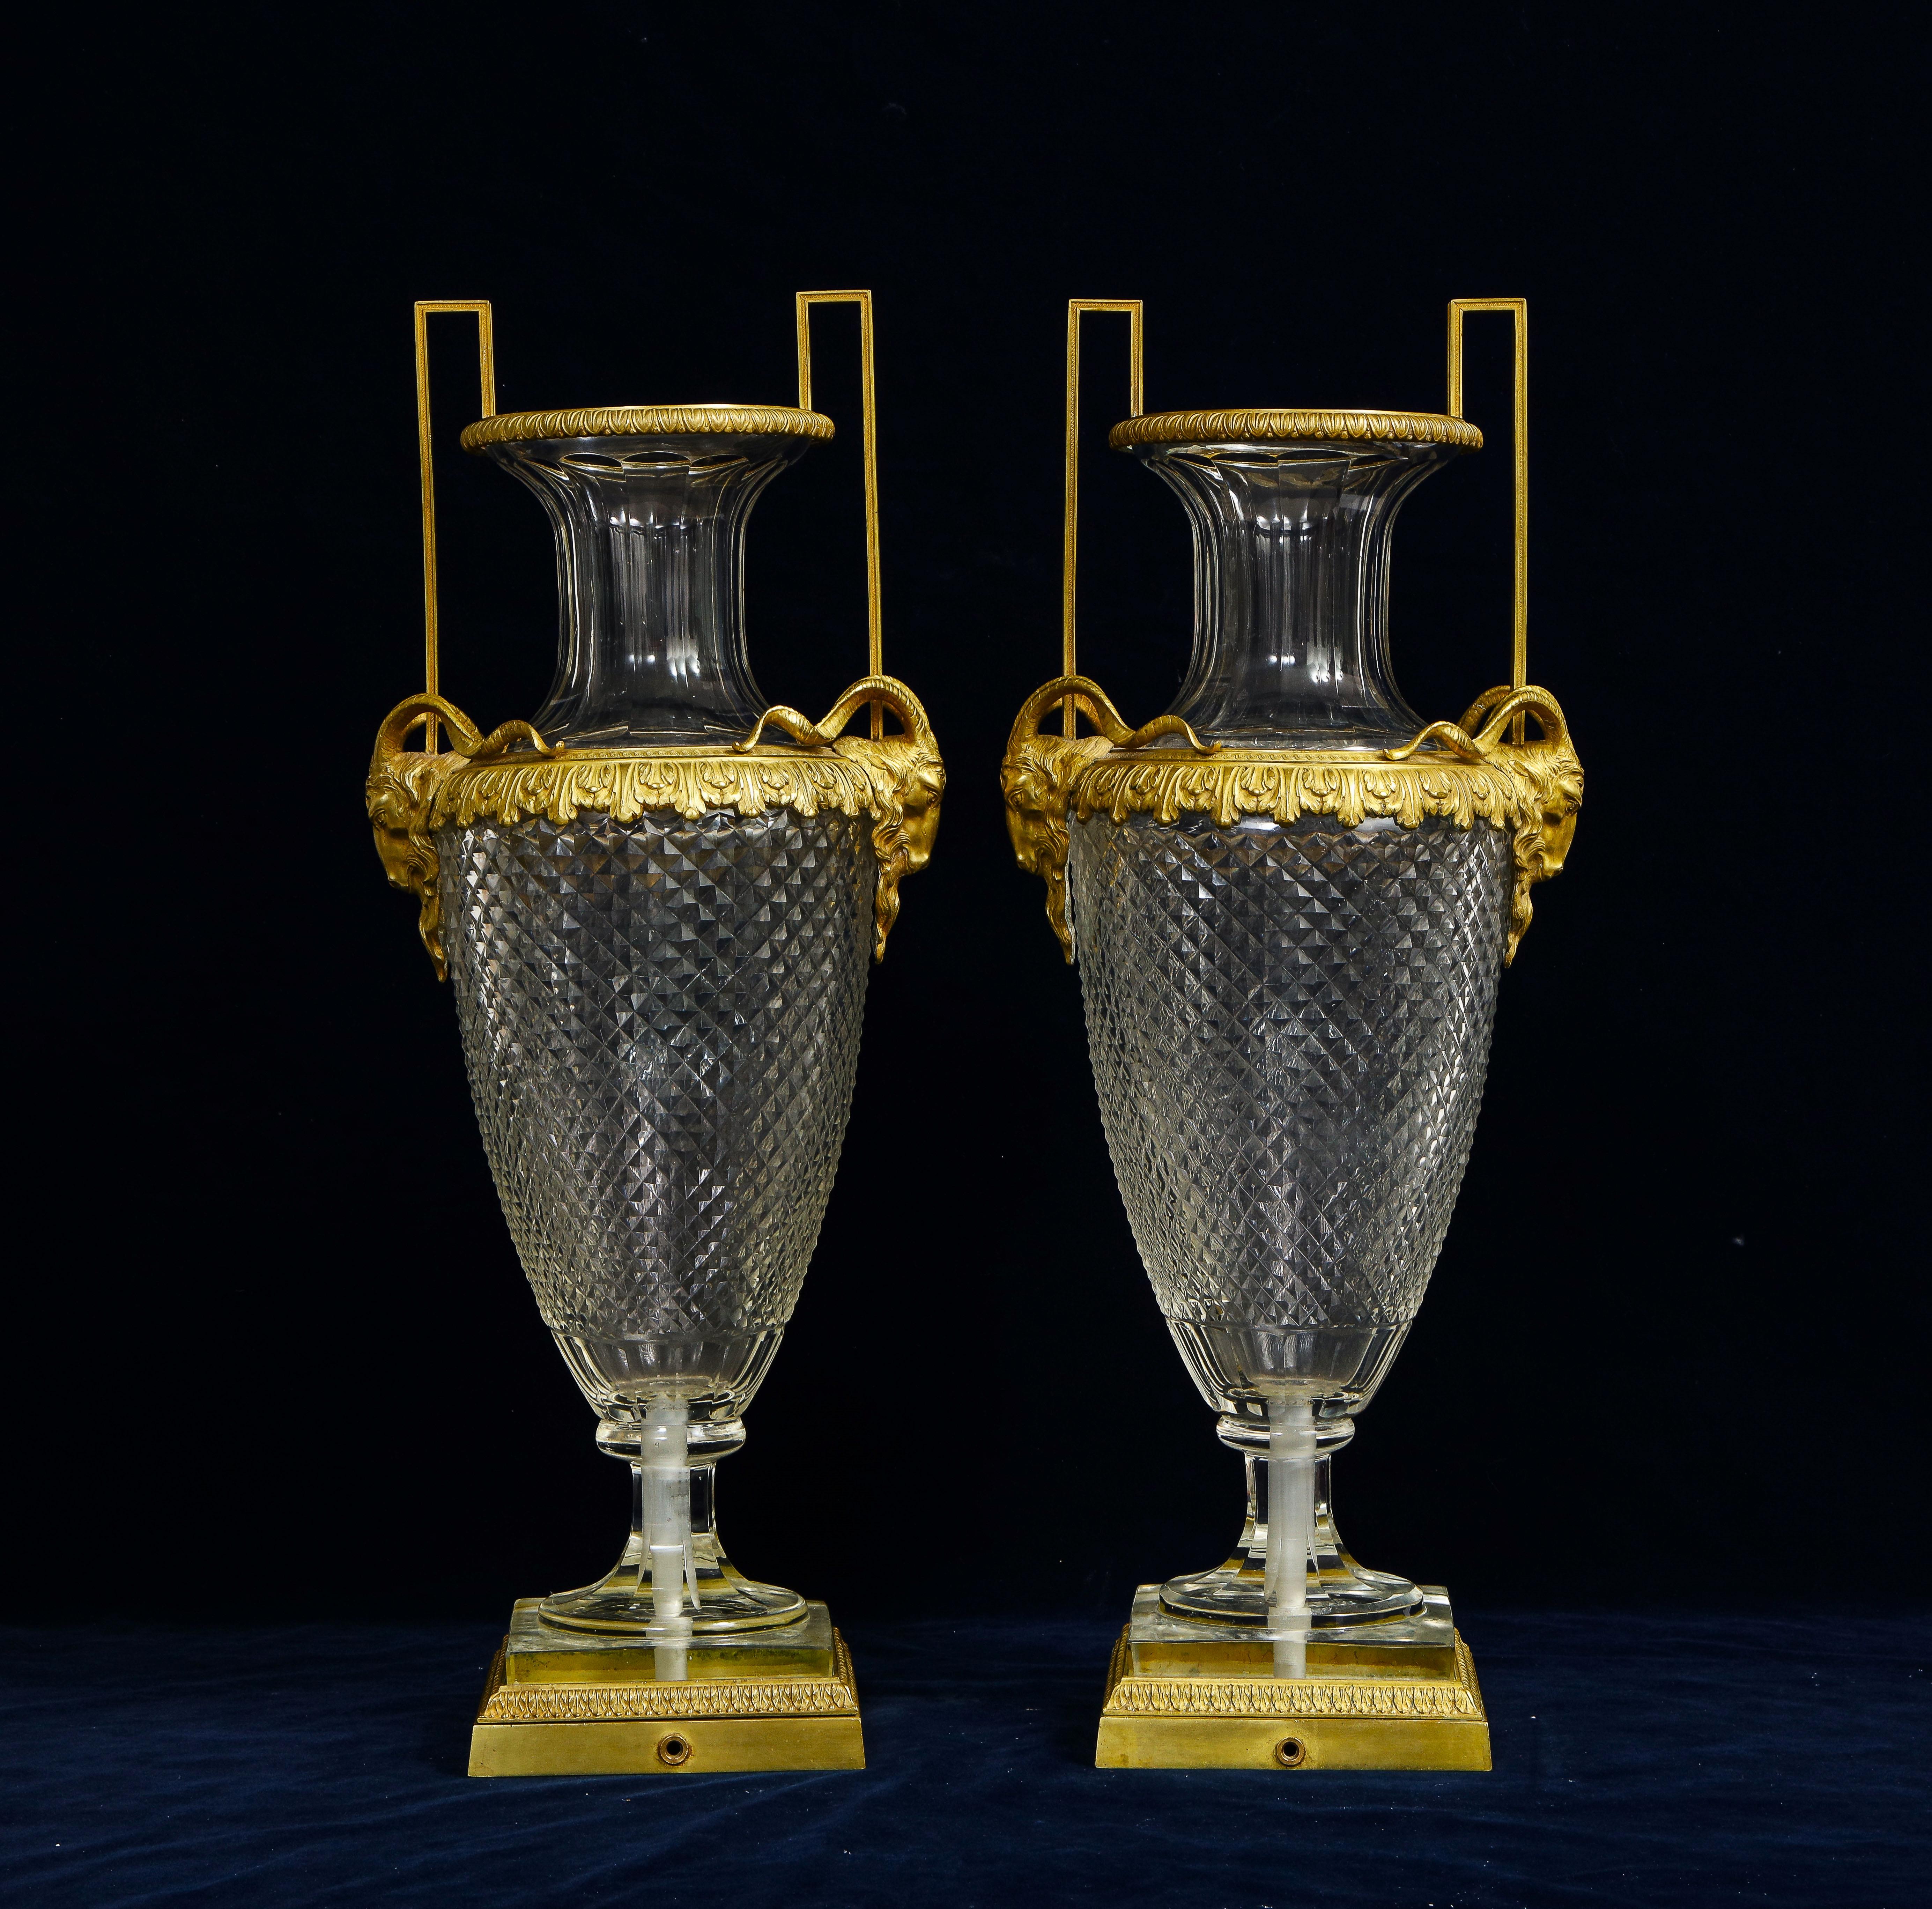 Louis XVI Pair of 19th Century French Dore Bronze Mounted Crystal Vases Attb to Baccarat For Sale